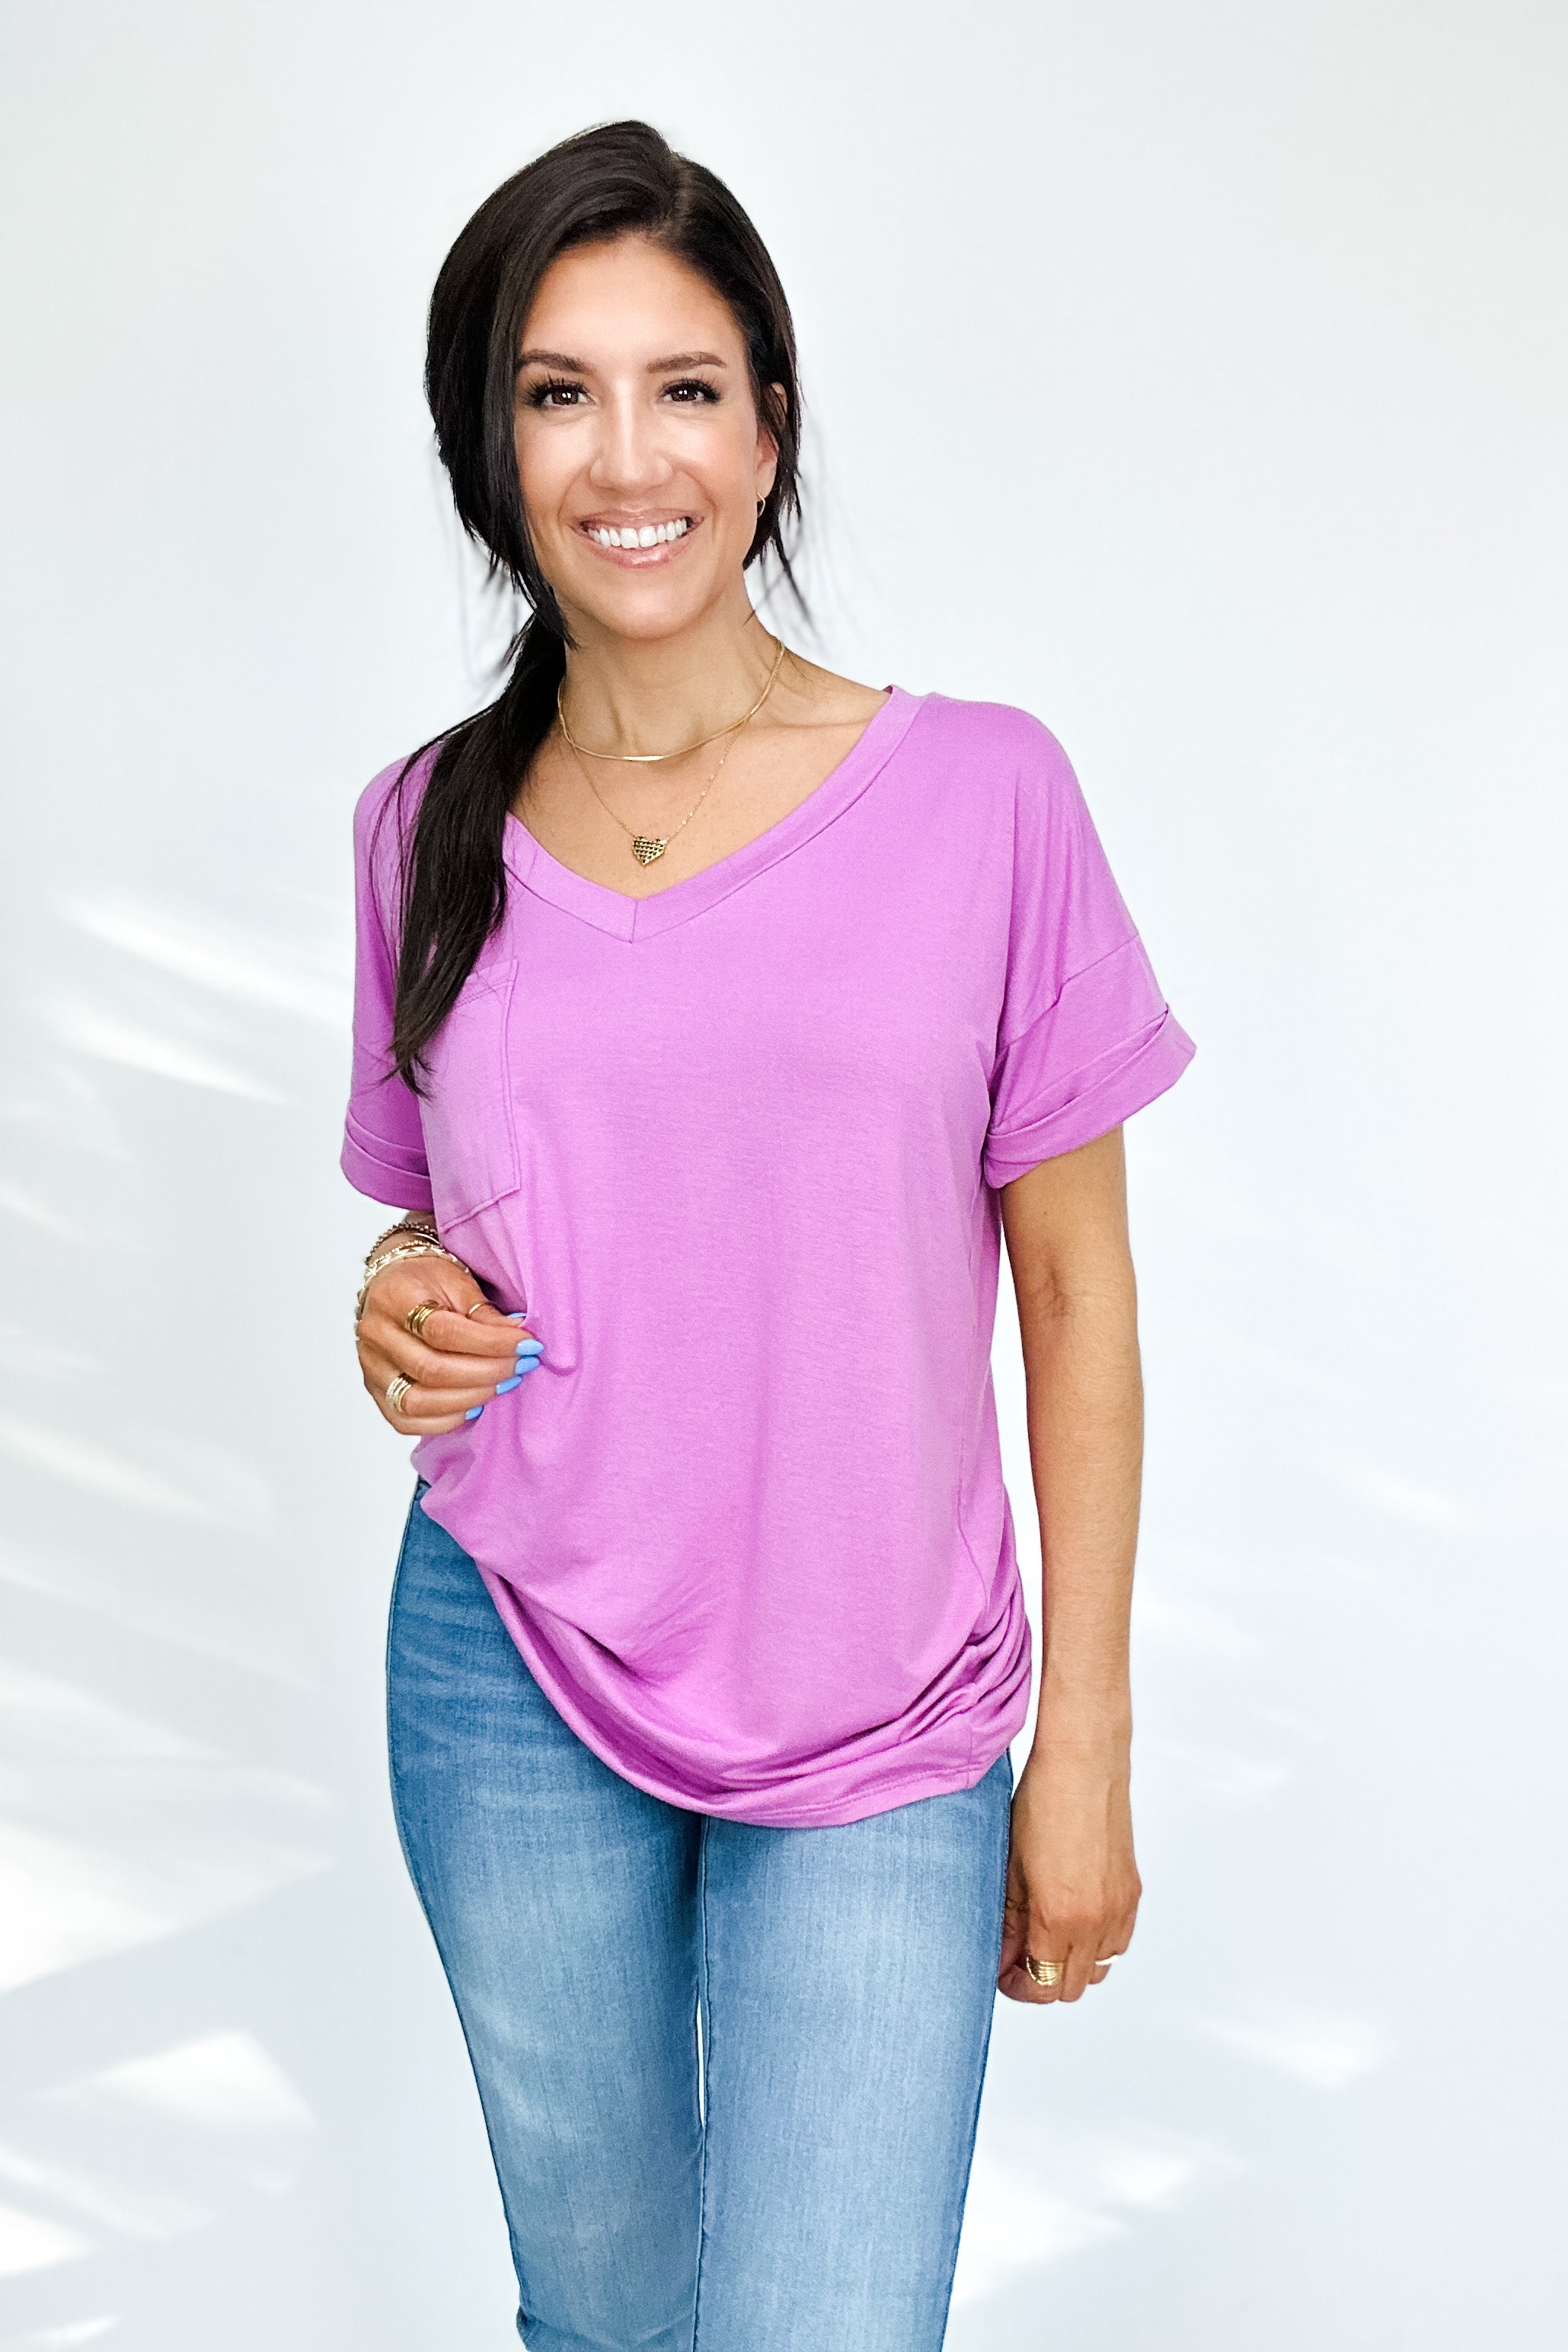 Absolute Favorite V-Neck Top in Orchid - WEBSITE EXCLUSIVE